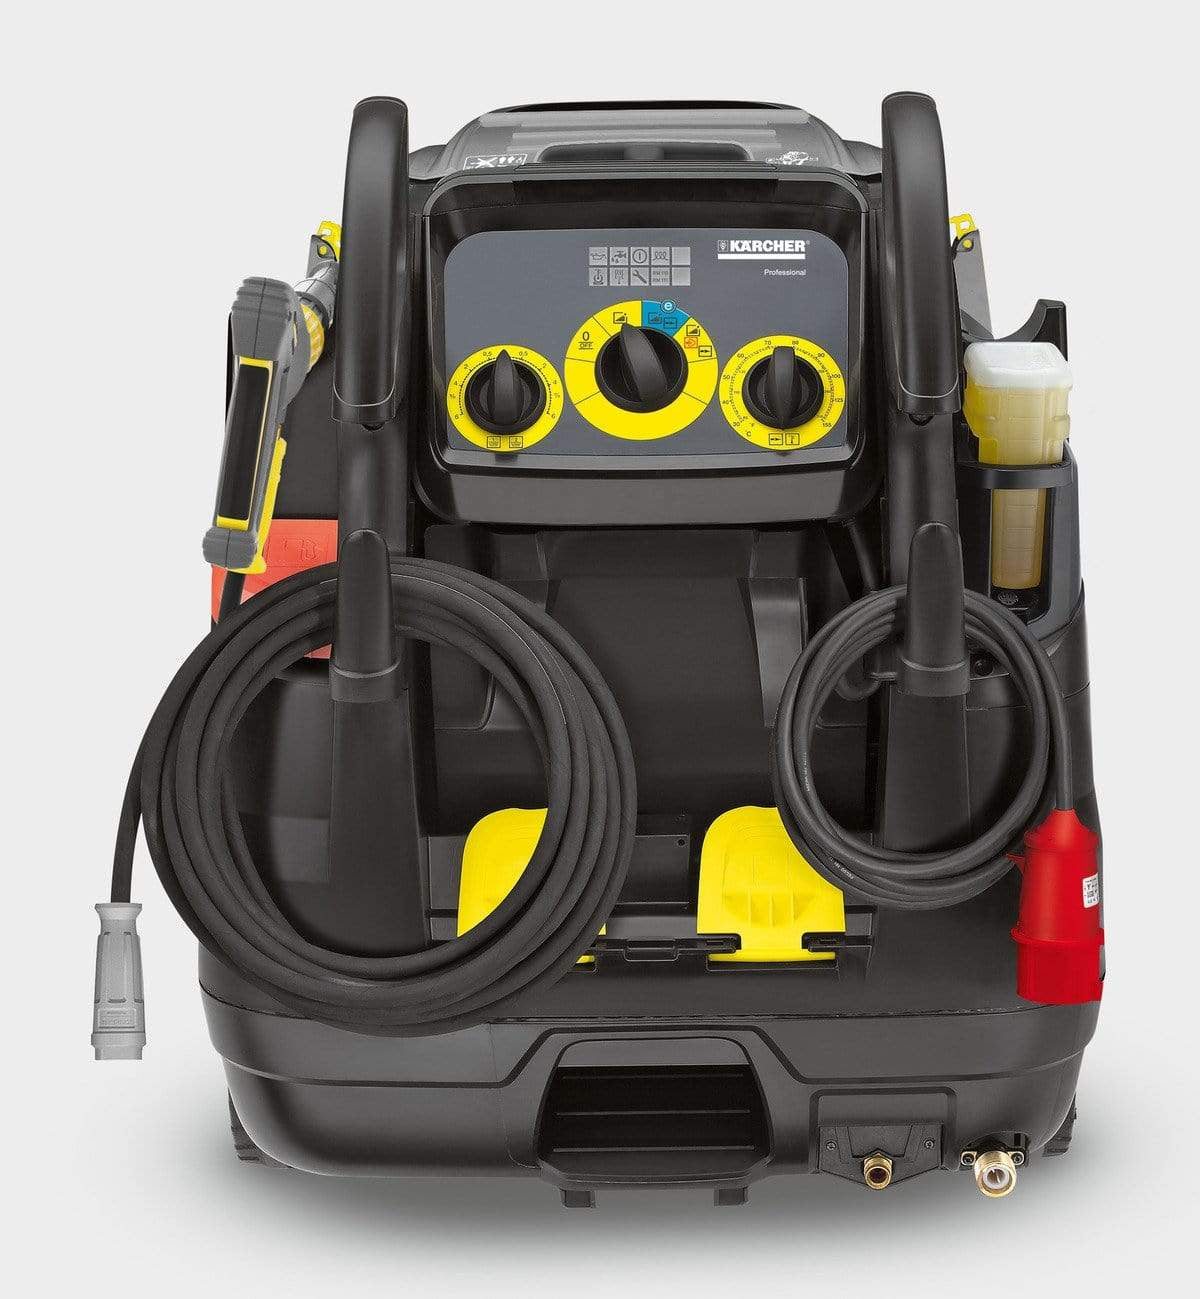 Karcher Hot and Cold High Pressure Washer 180 Bar - HDS 8/18-4 M | Supply Master | Accra, Ghana Tools Building Steel Engineering Hardware tool